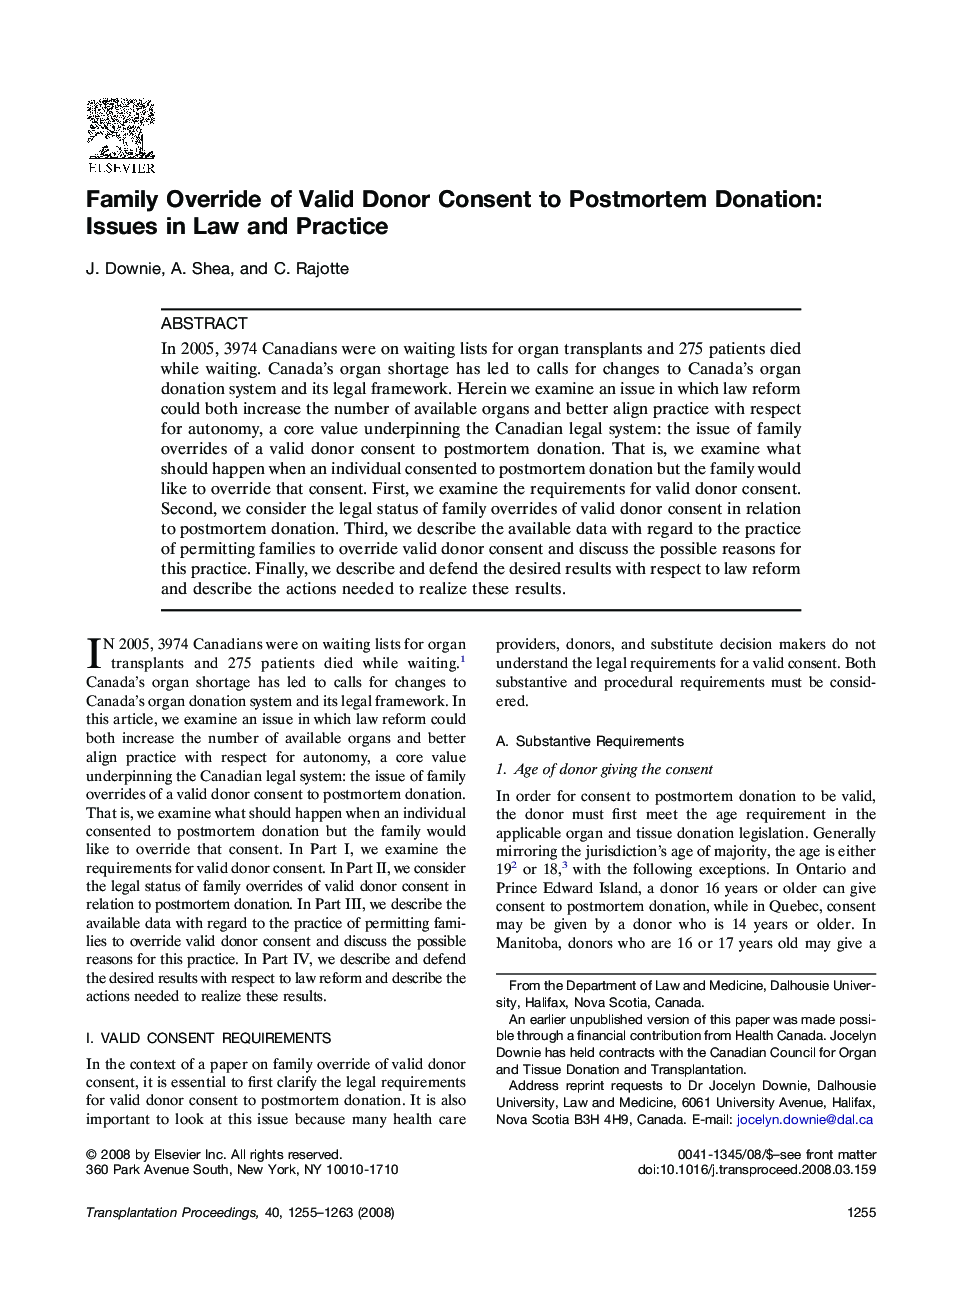 Family Override of Valid Donor Consent to Postmortem Donation: Issues in Law and Practice 